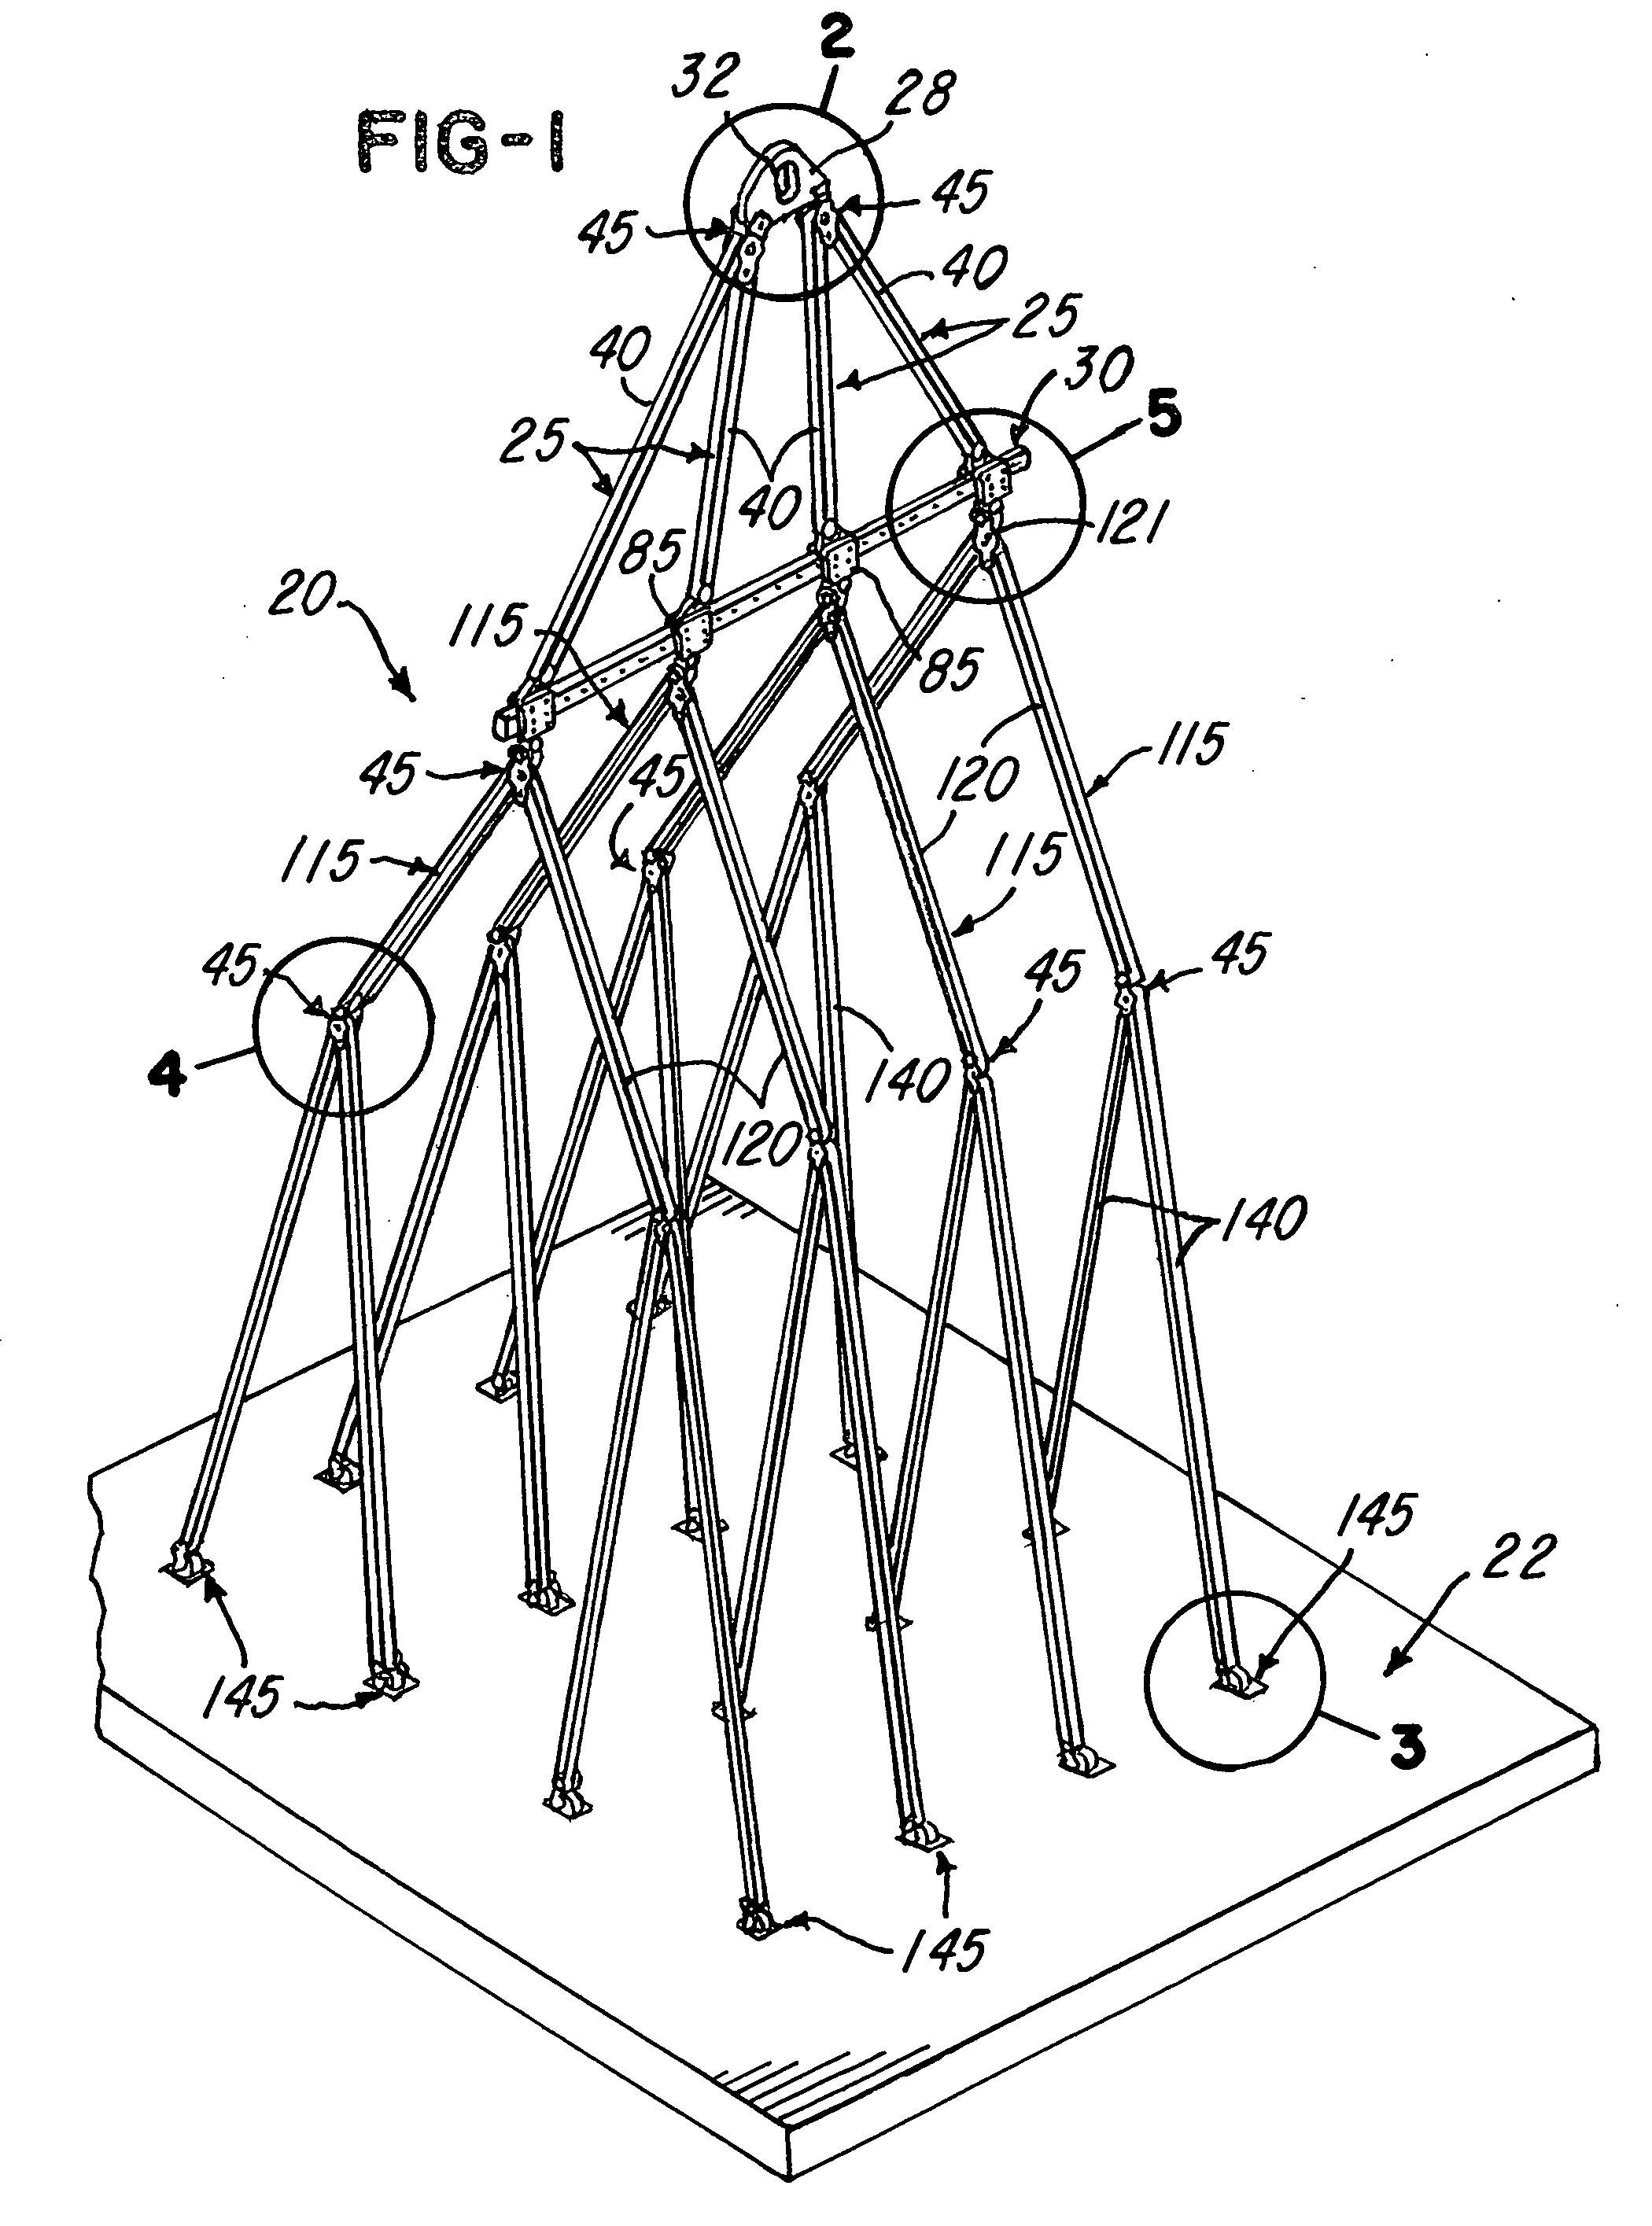 Synthetic fiber sling and roller system for carrying and positioning a load